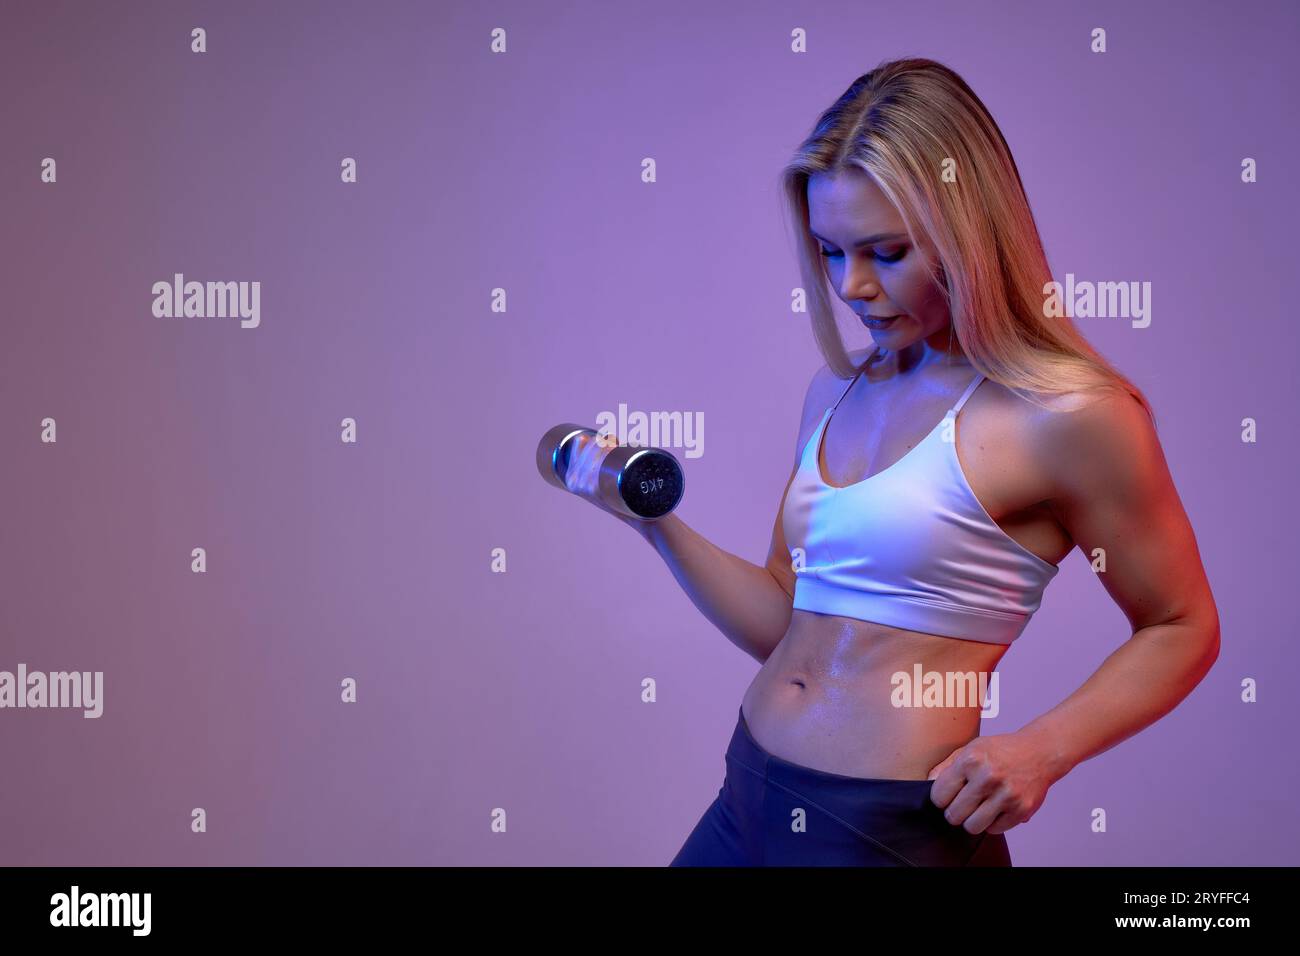 slim body of a young fit sporty woman lifting dumbbells, sweaty girl looking at her belly Stock Photo